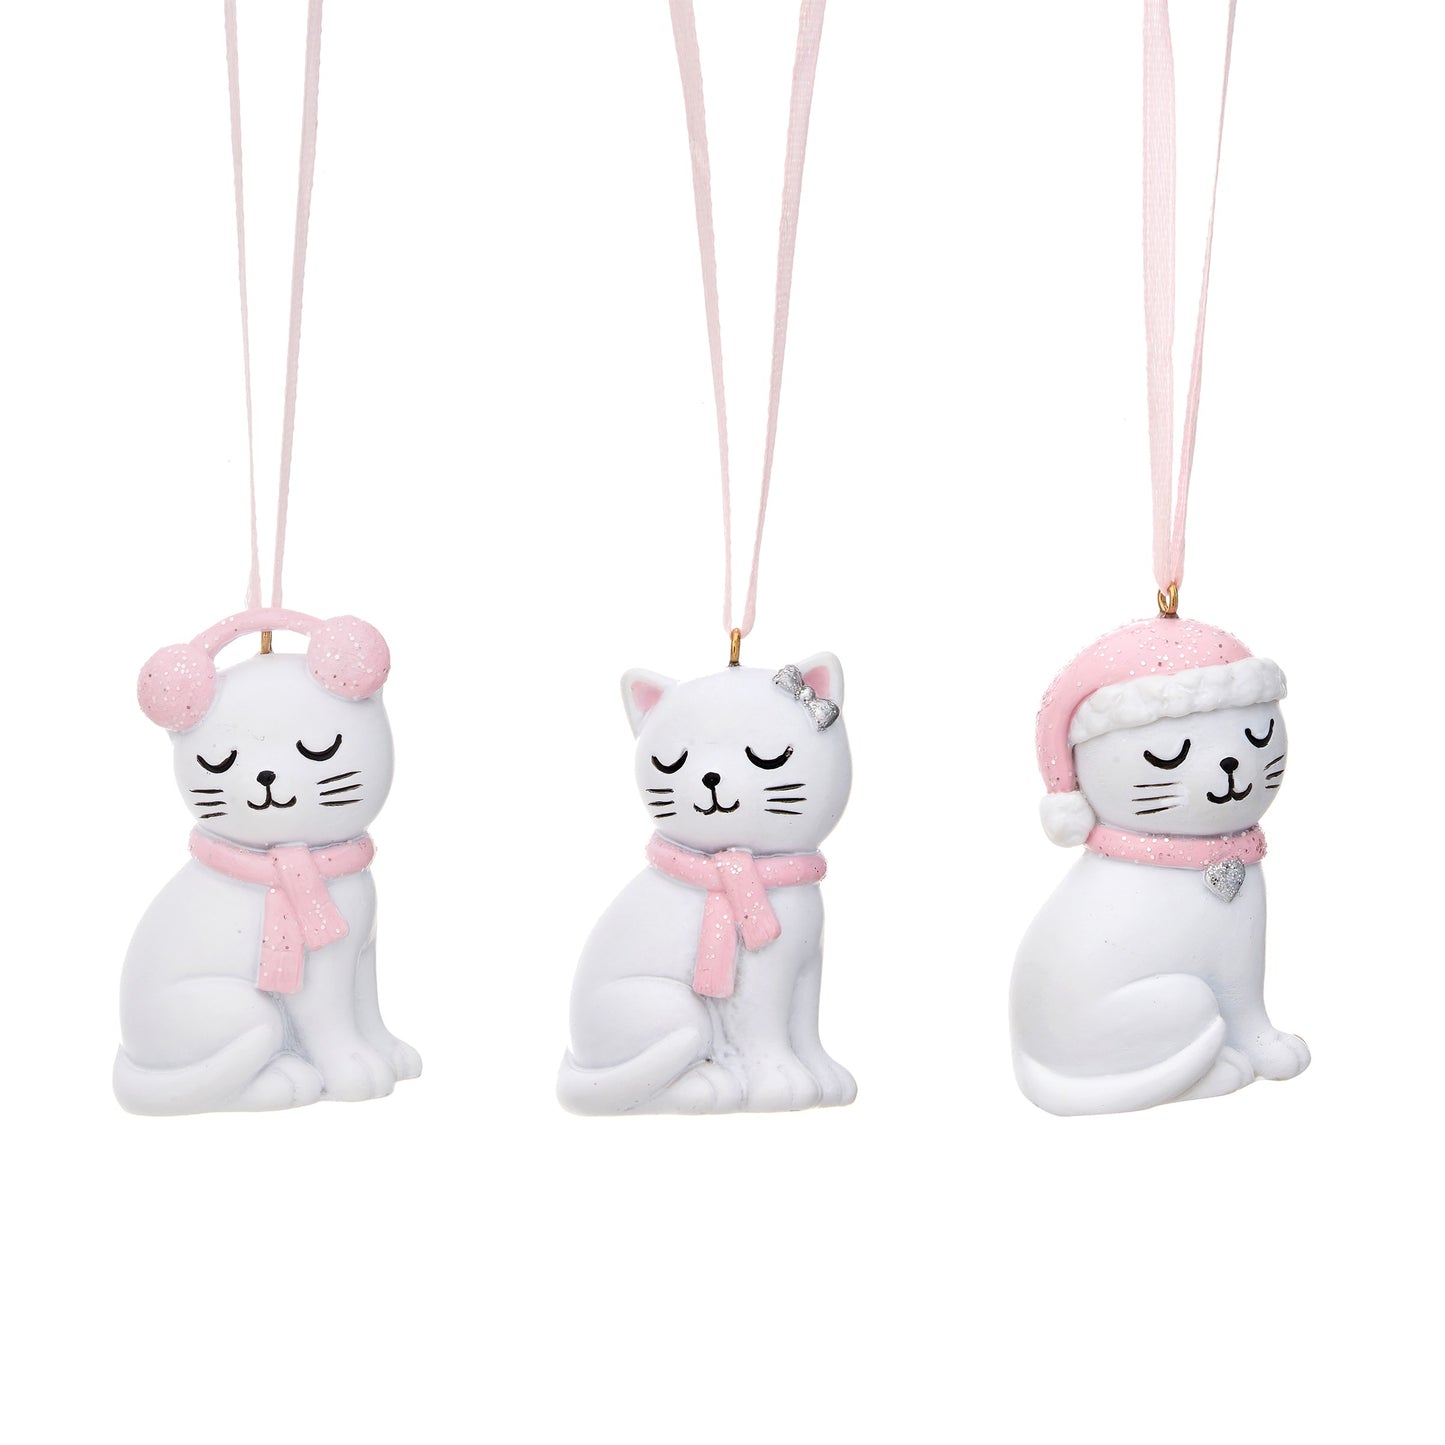 Cats with Pink Accessories Christmas Decorations (Set of 3)